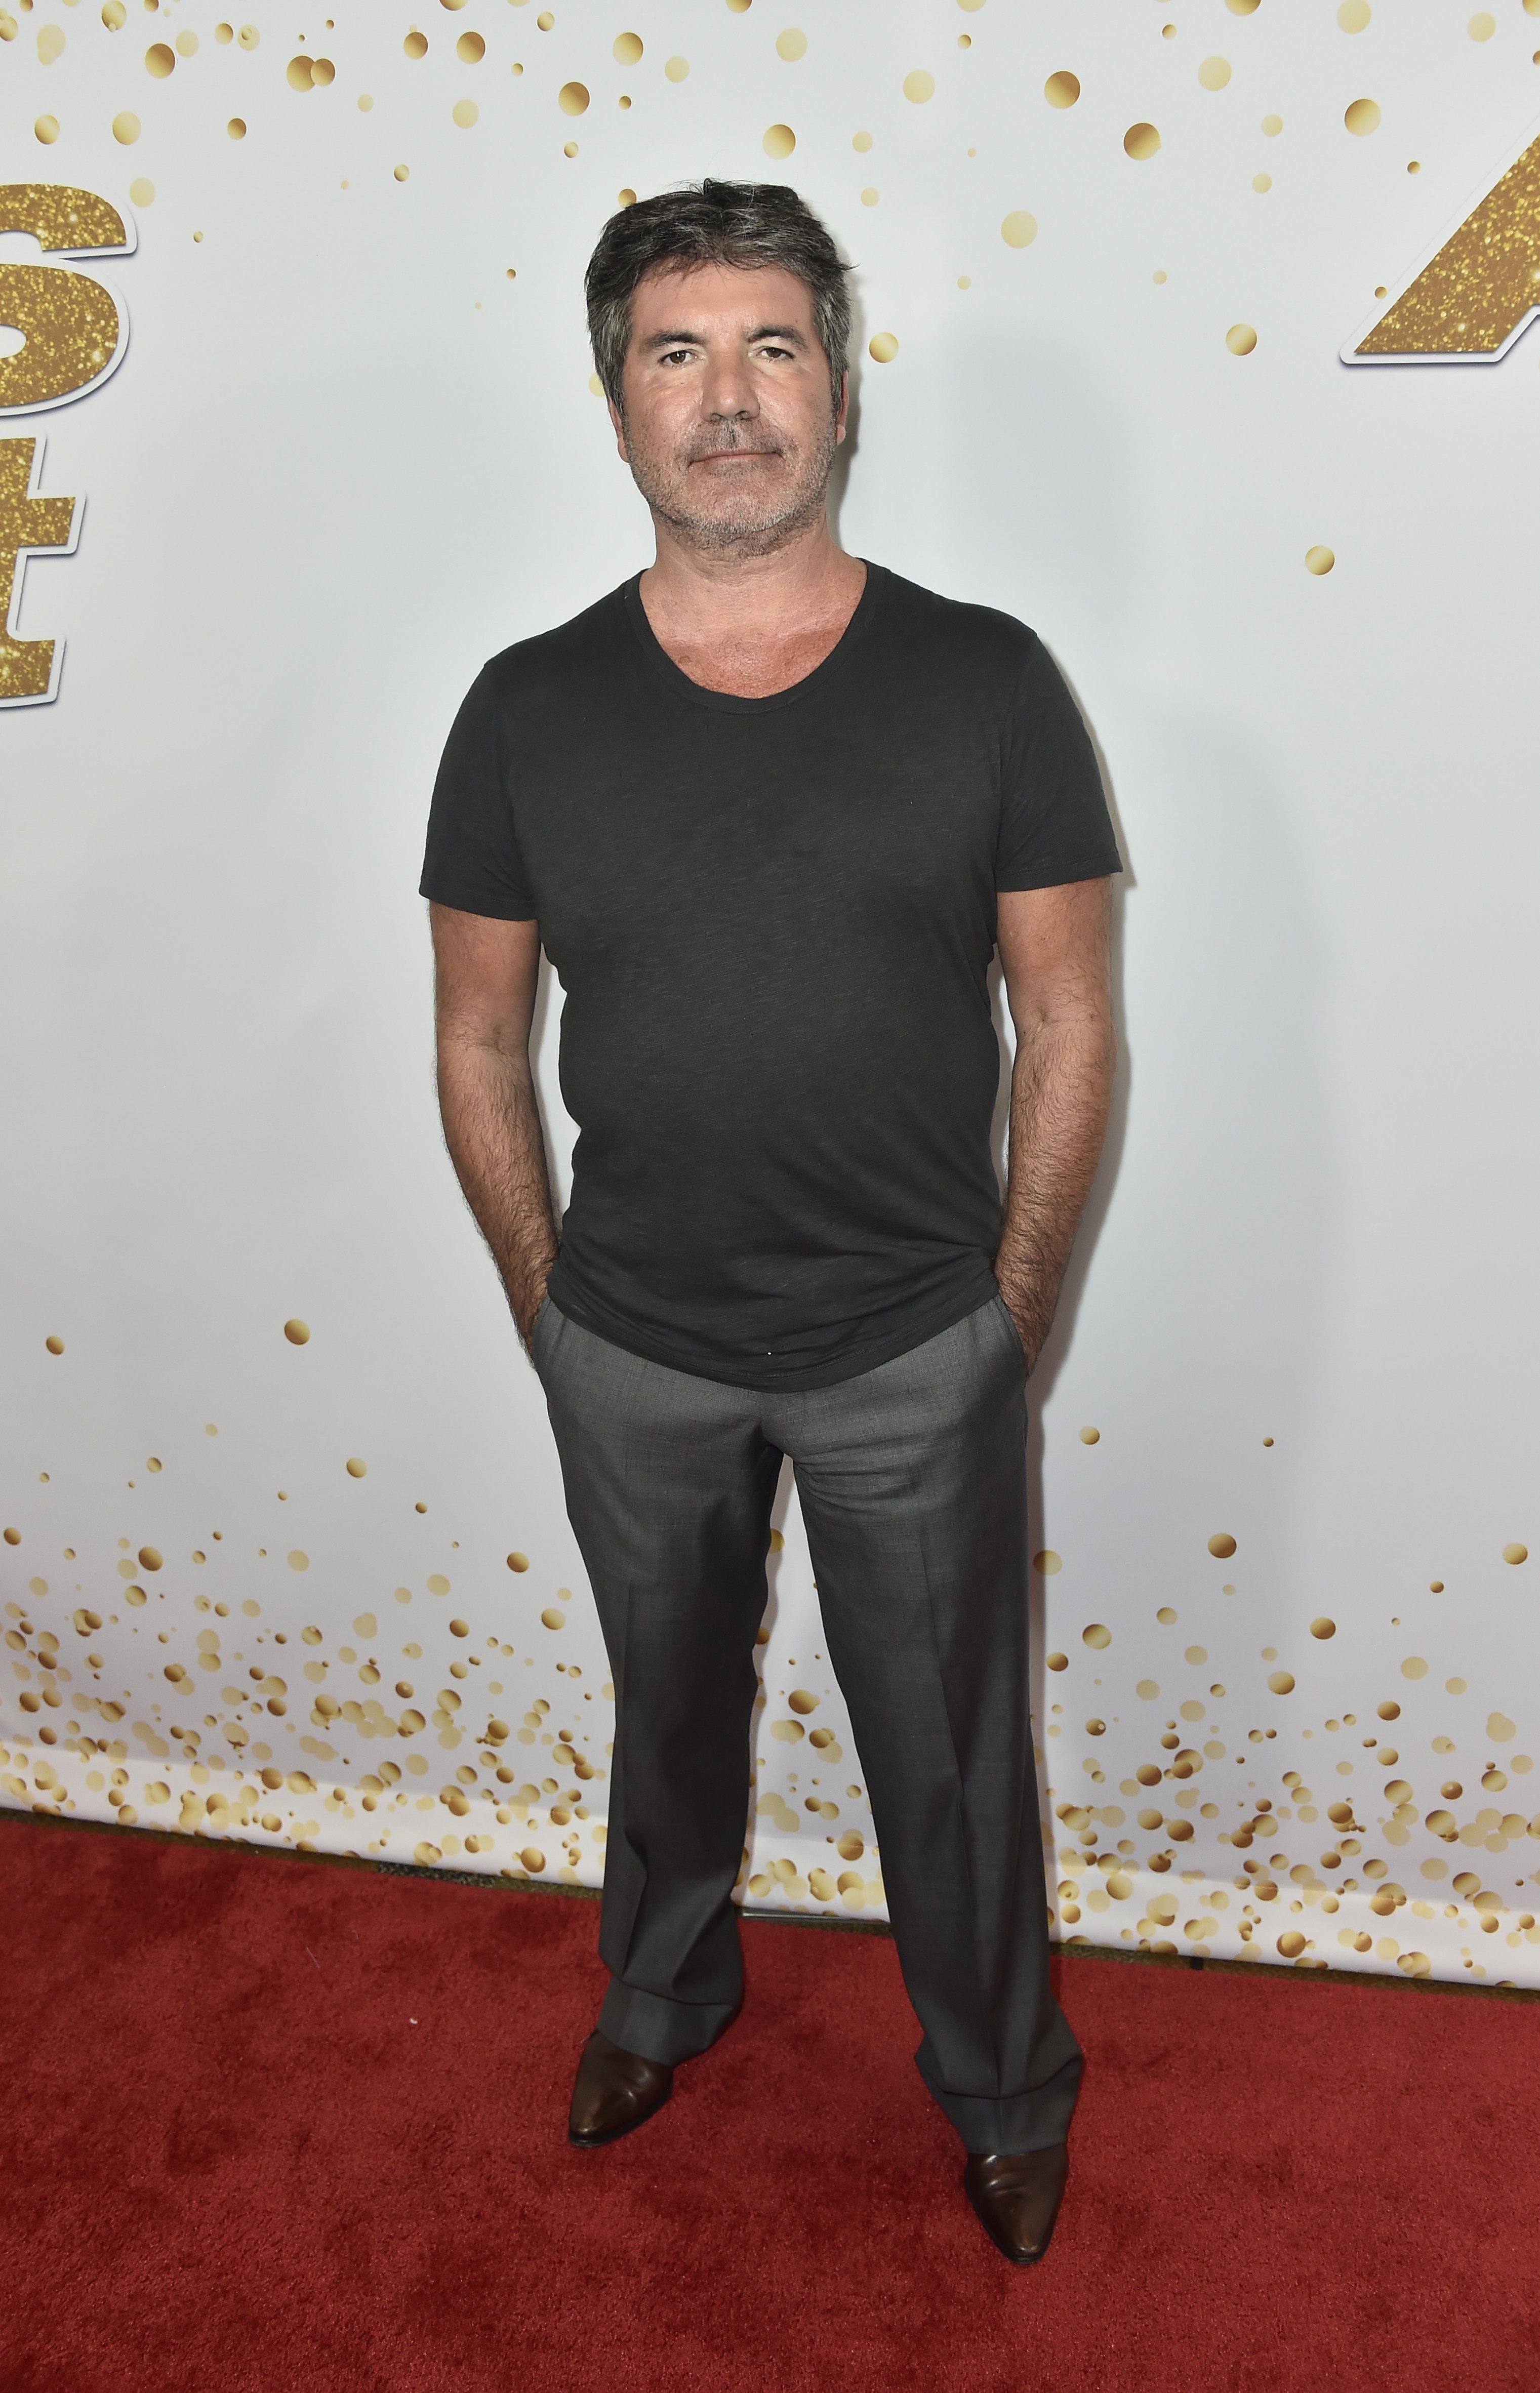 Simon Cowell at an event for "America's Got Talent" | Photo: Getty Images